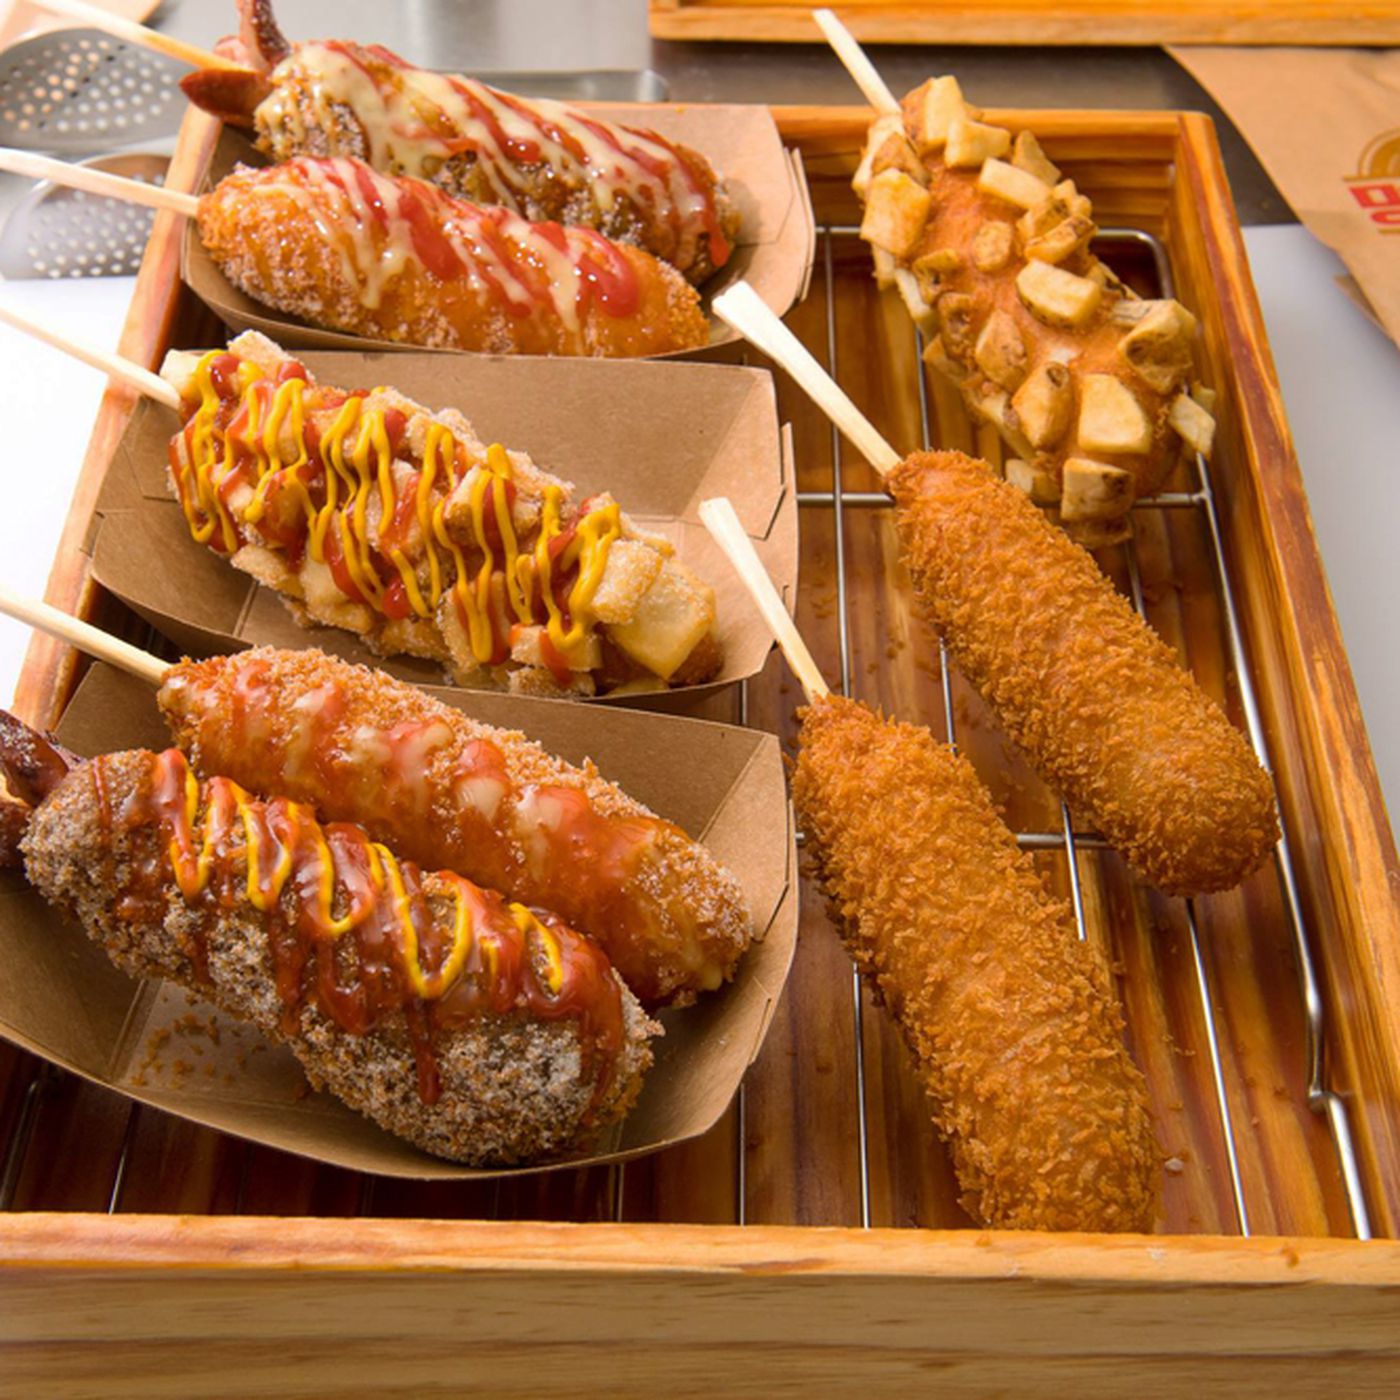 Myungrang Hot Dog Opens In Chinatown Eater Vegas,Crockpot Chicken Breast Recipes Easy